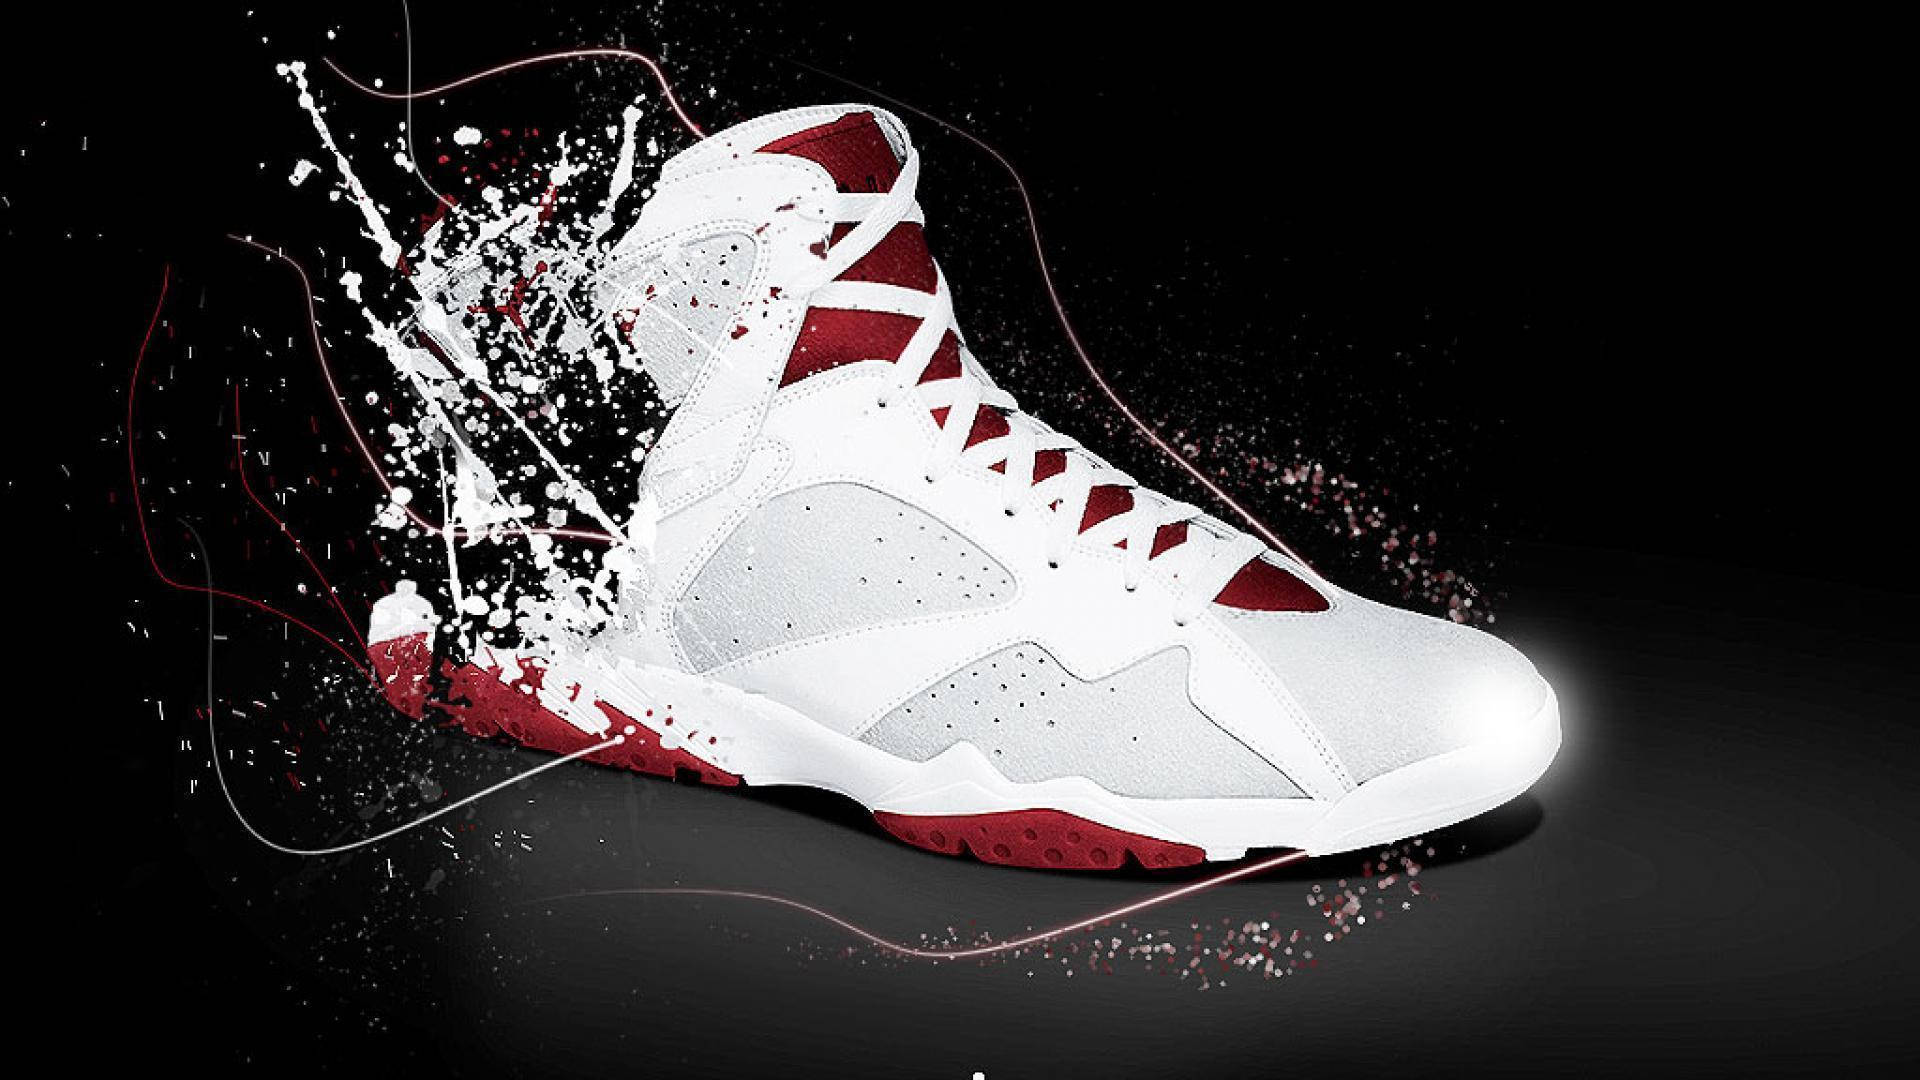 Red And White Jordan 7 Shoes